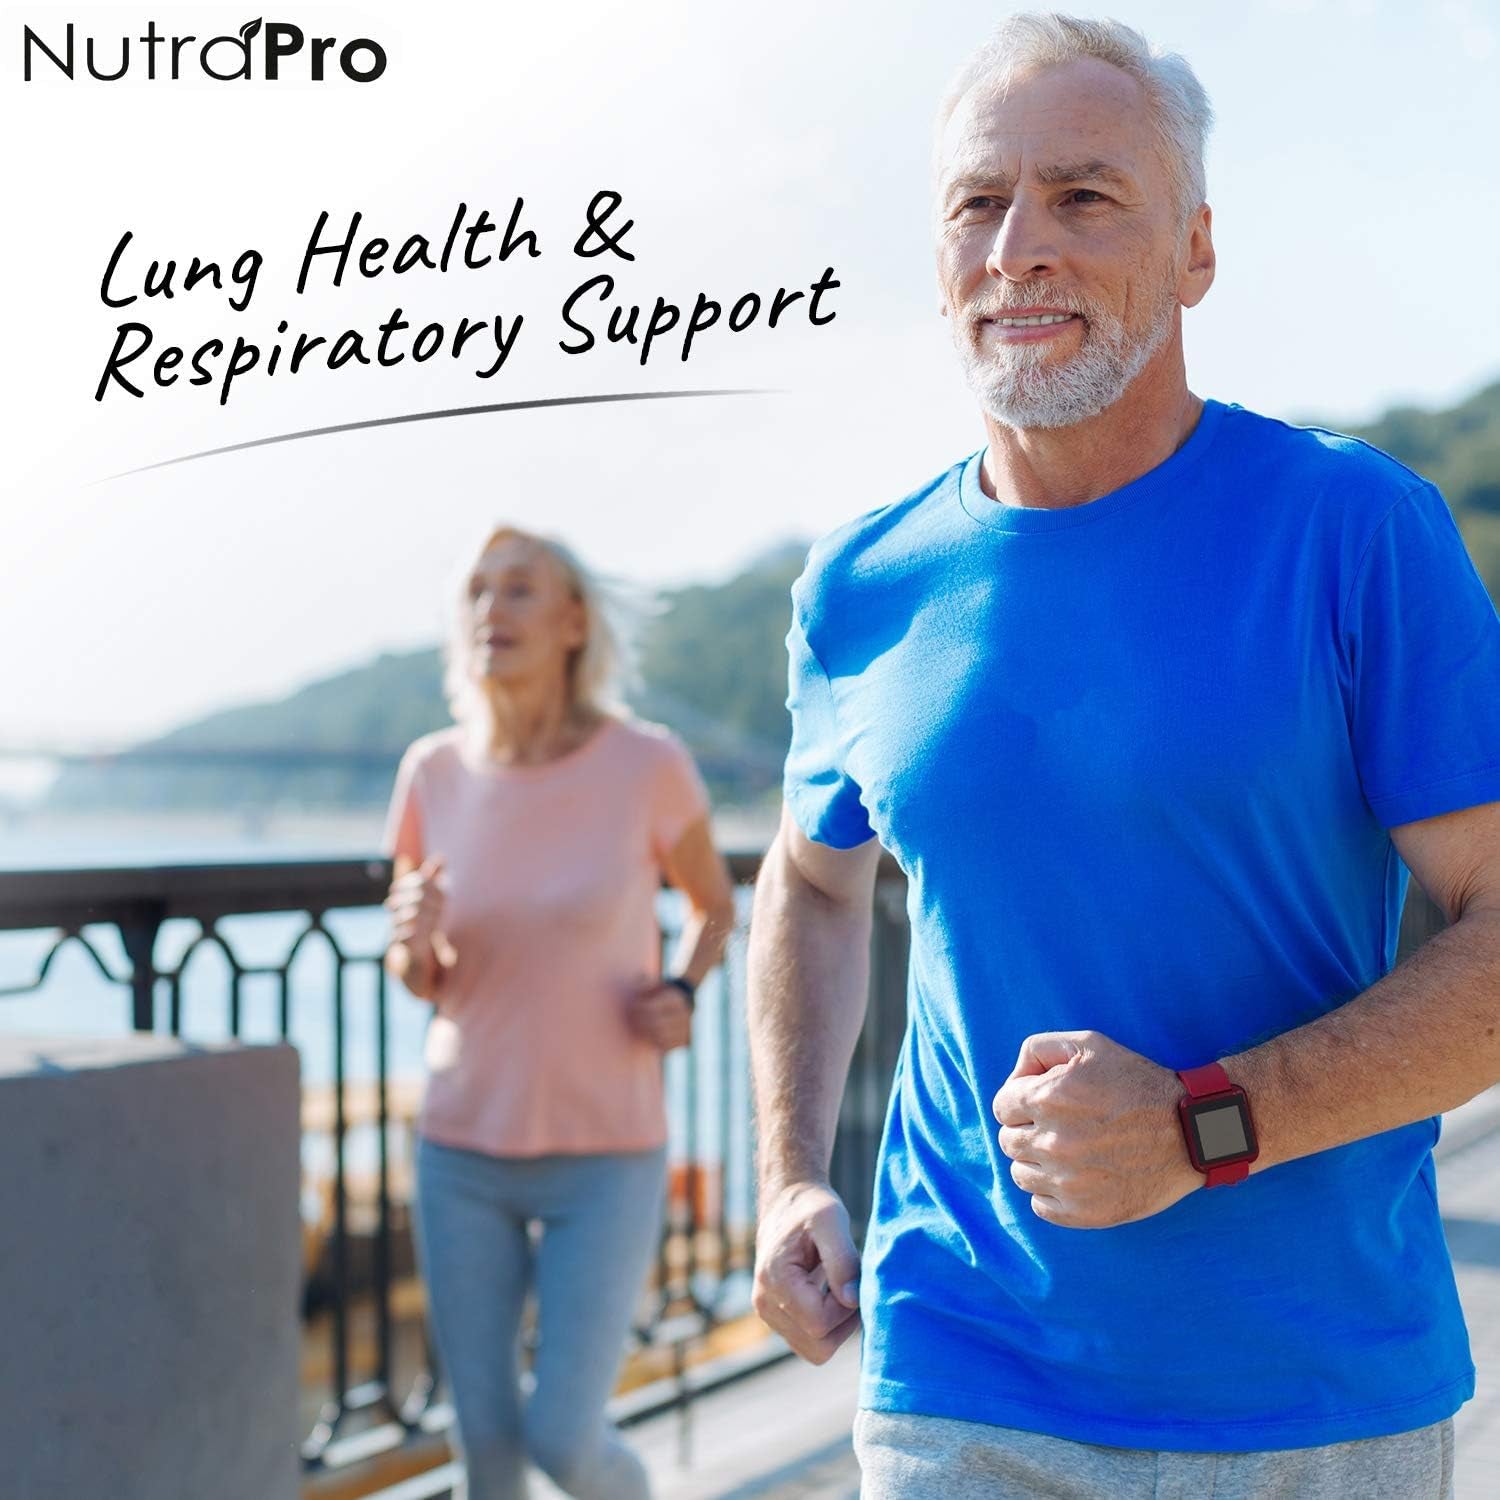 Nutrapro White Lung Lung Cleanse & Detox.Support Lung Health. Supports Respiratory Health. 60 Capsule - Made in GMP Certified Facility.